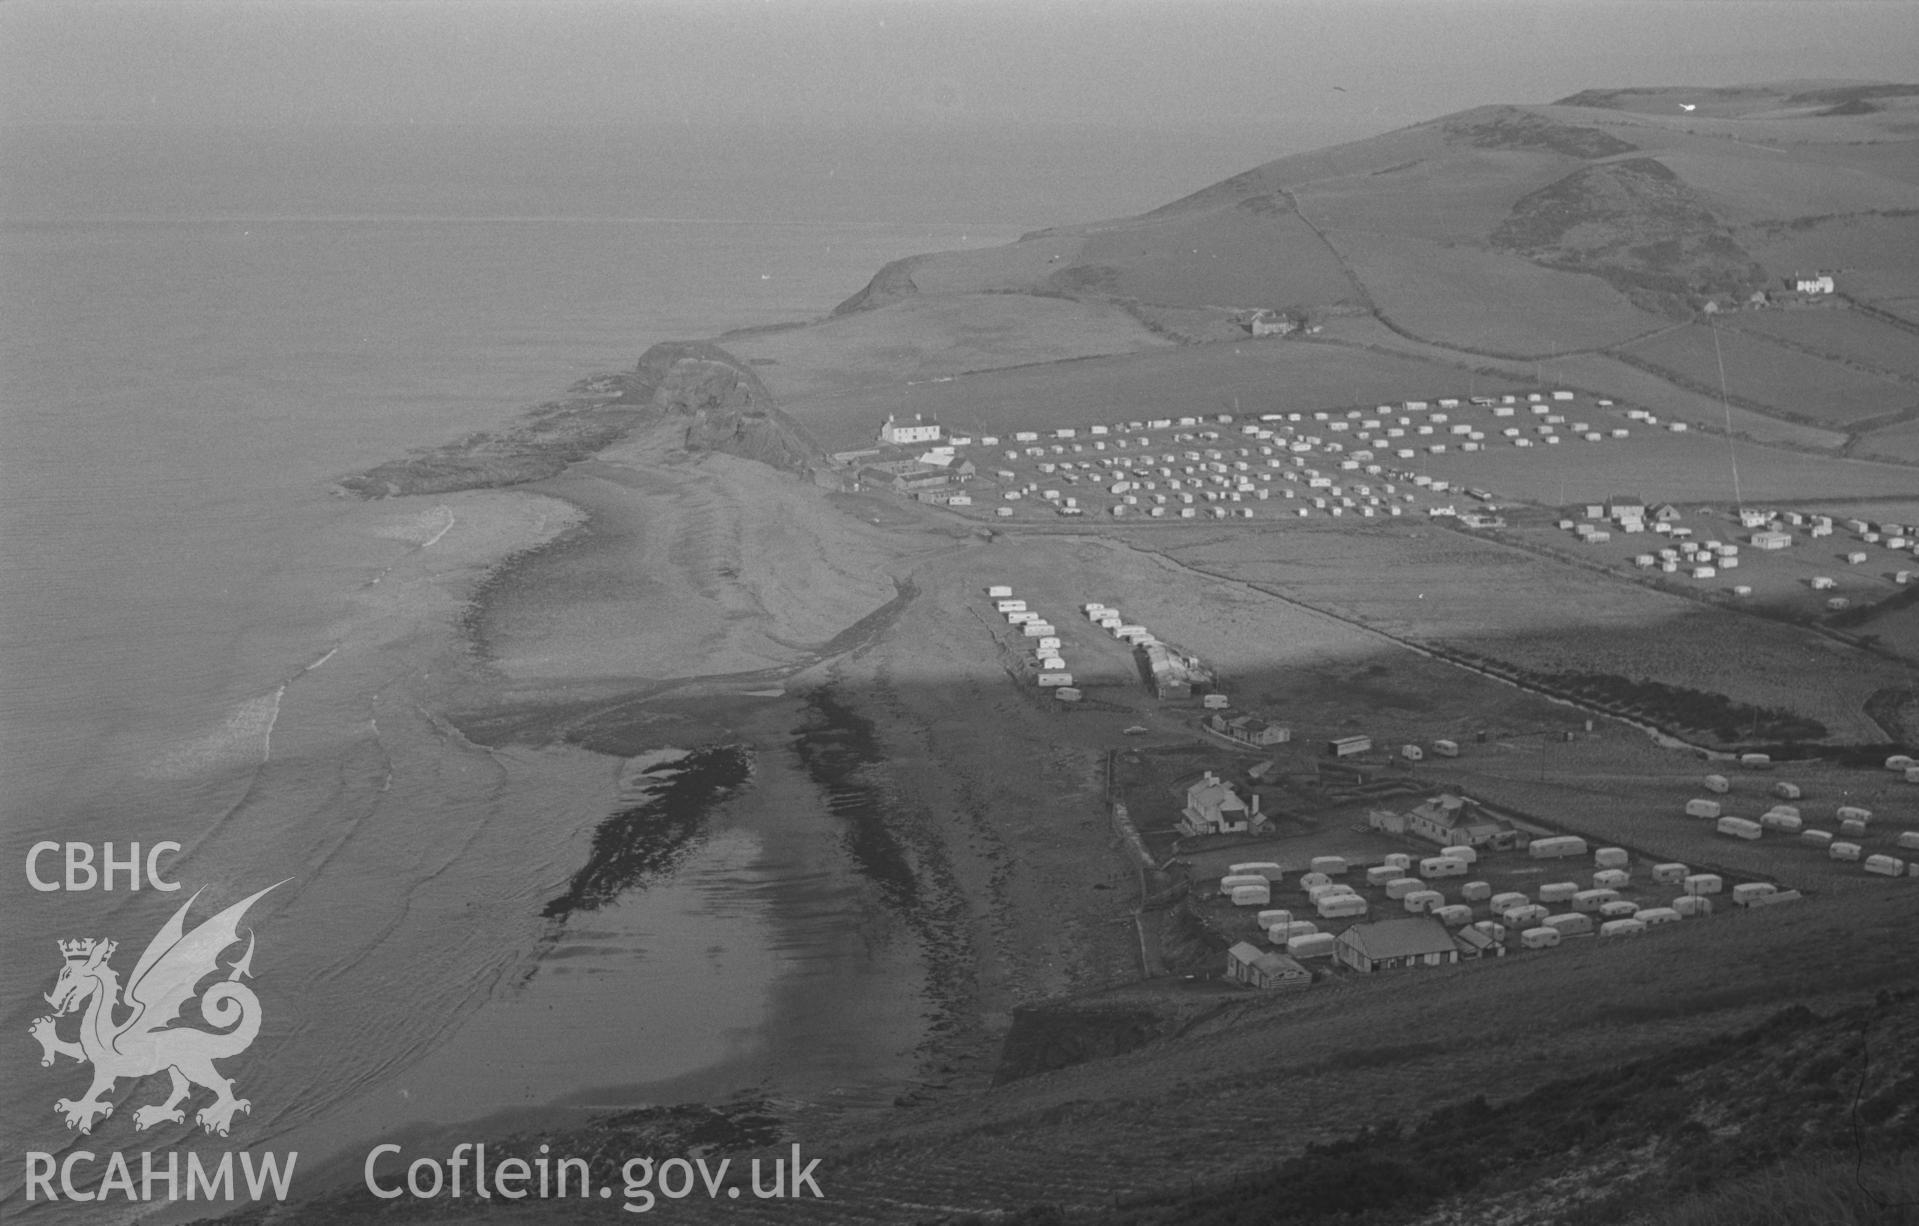 Black and White photograph showing view of Clarach from the upper footpath on the north side of Constitution hill, with caravans. Photographed by Arthur Chater in December 1962 from Grid Reference SN 587 833, looking north.